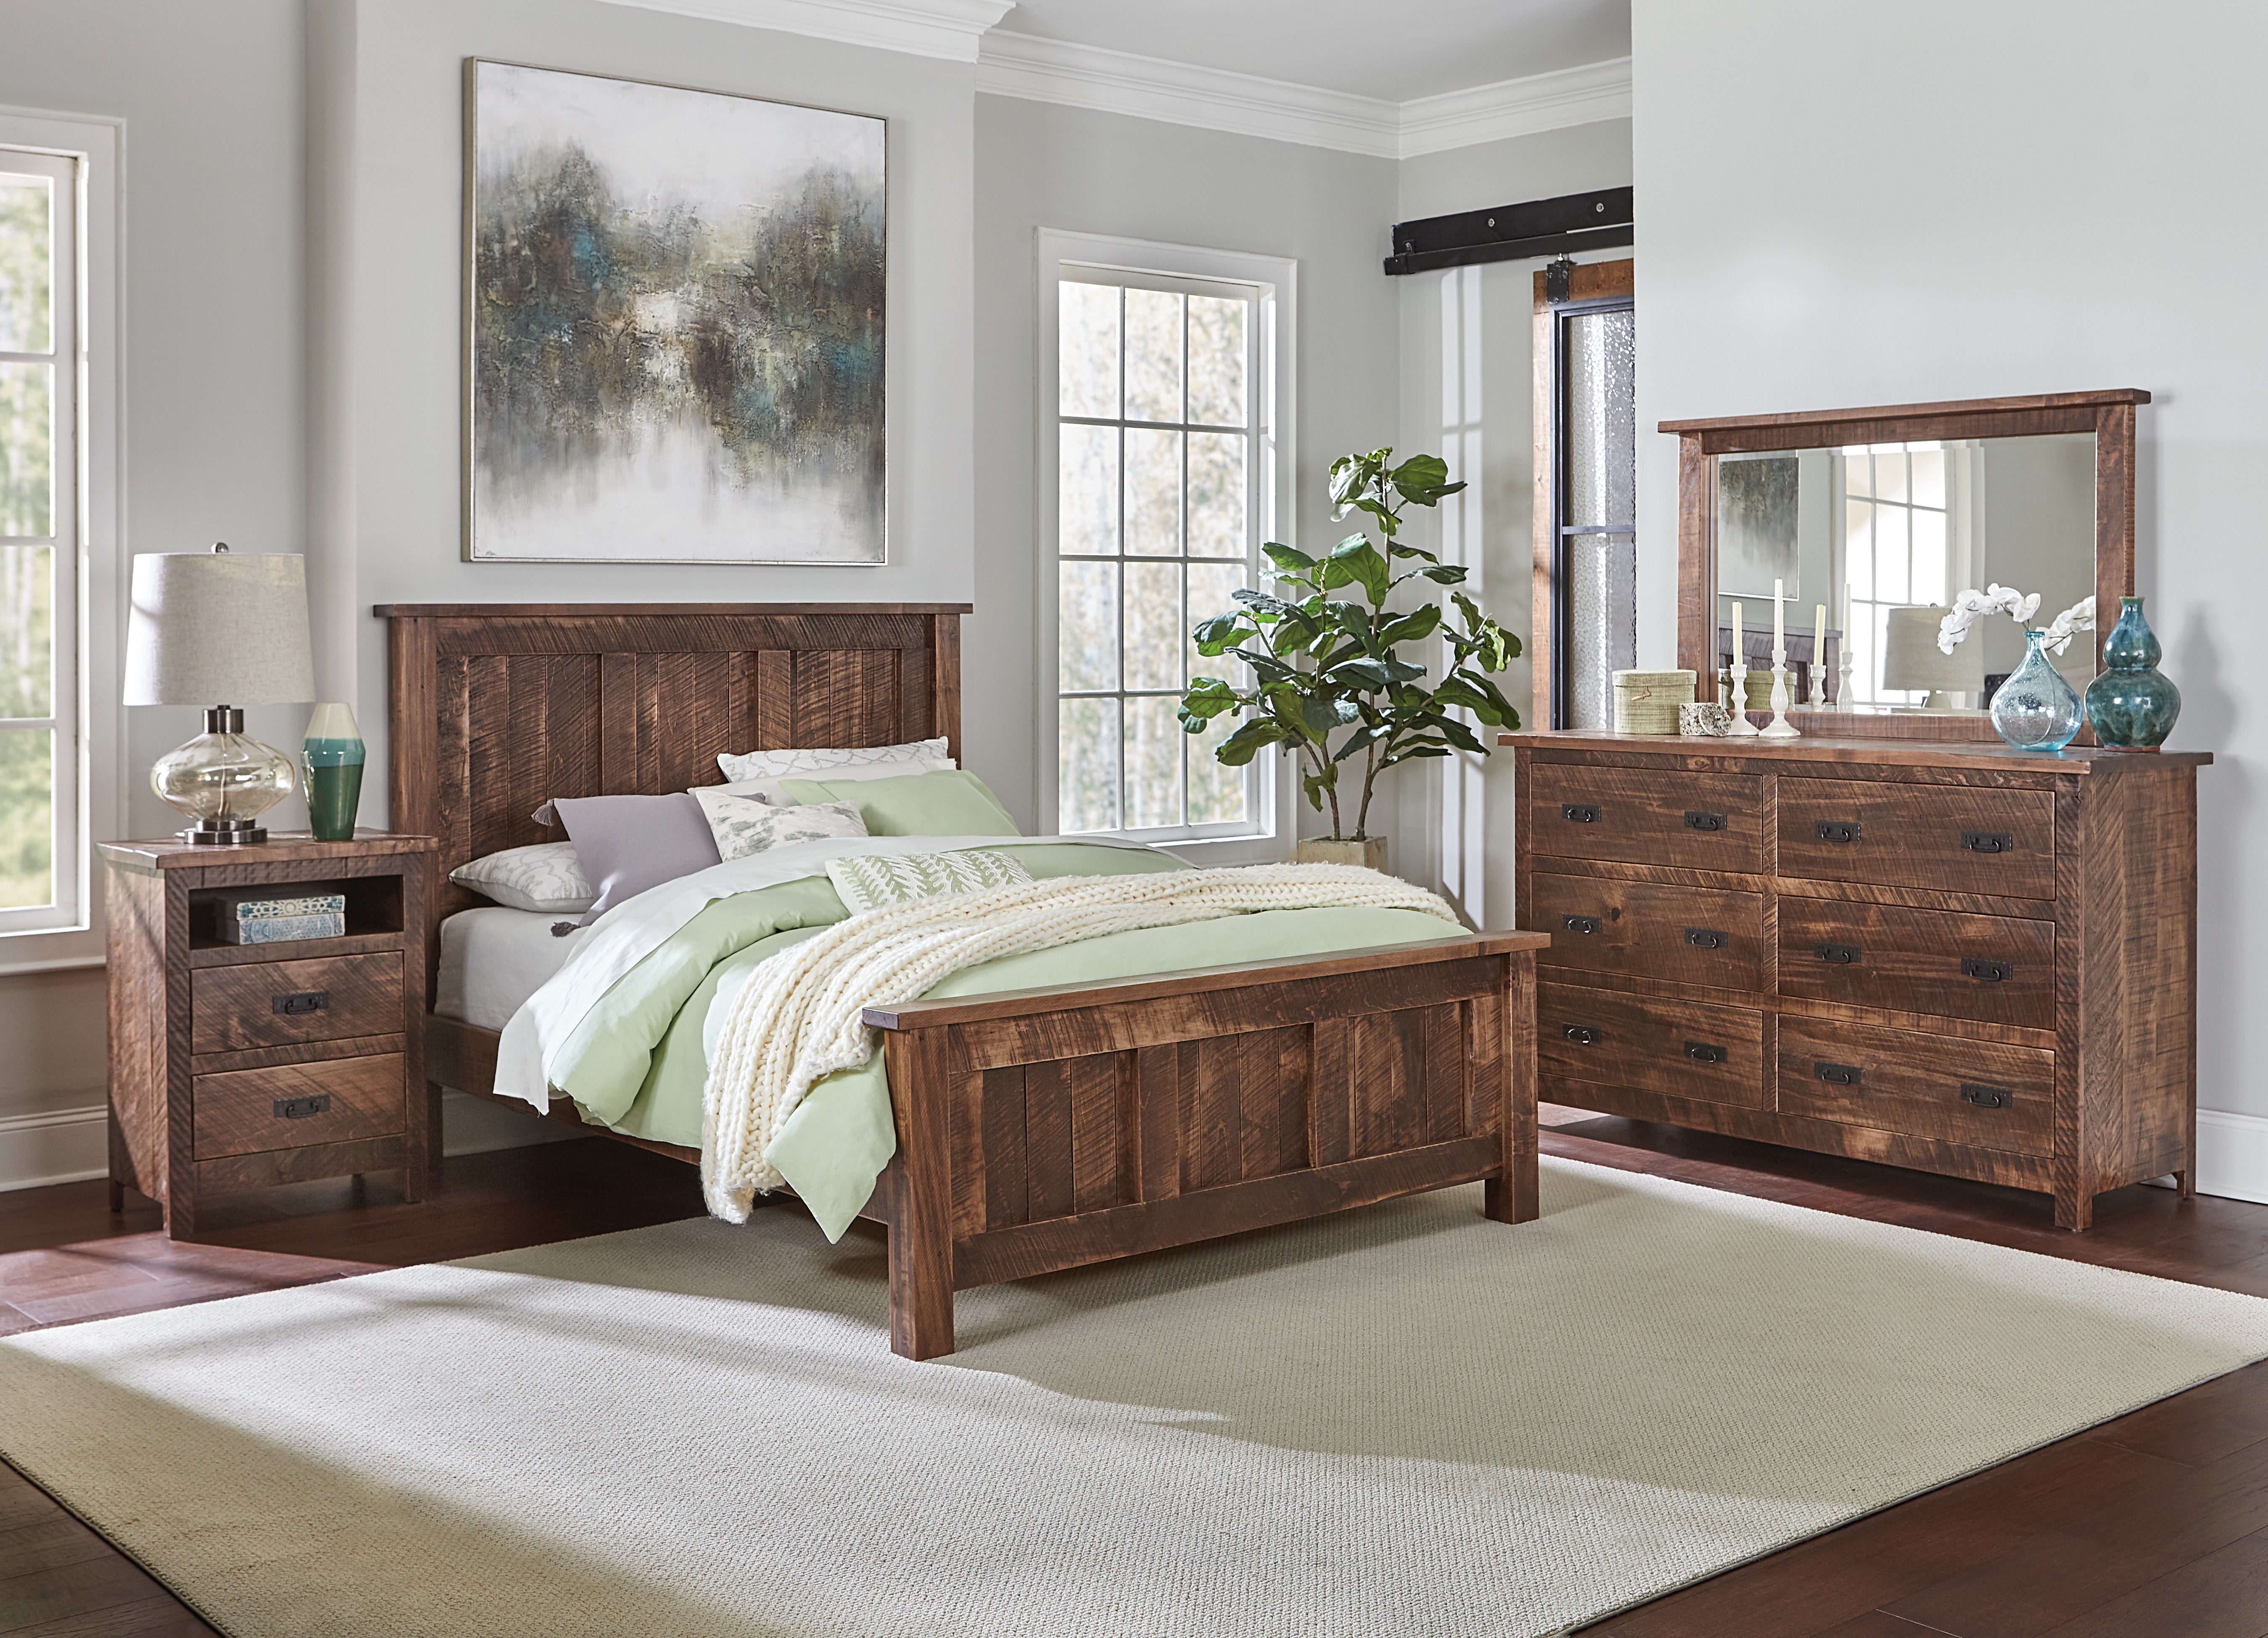 dumont bed room setting in rustic rough sawn brown maple and almond stain